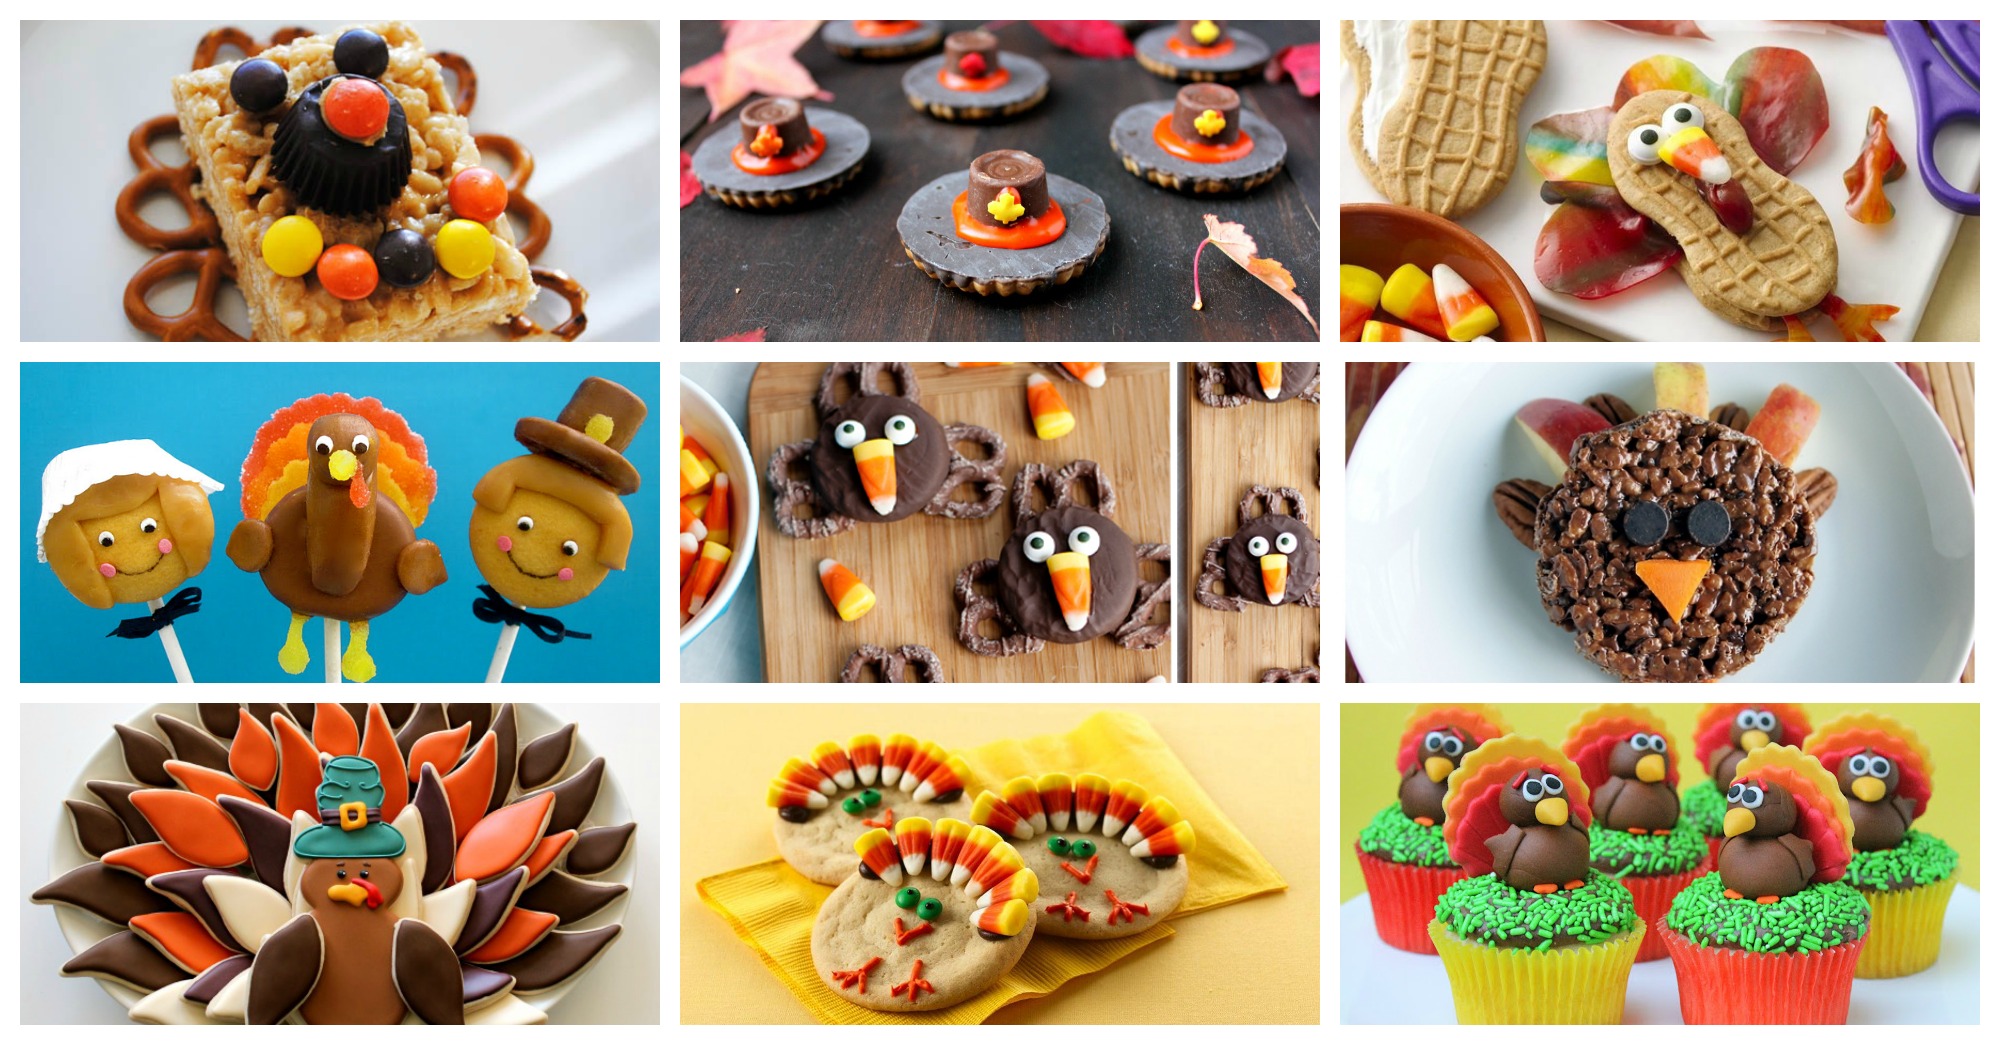 17 Fun and Yummy Thanksgiving Desserts Your Kids Will Love - Top Dreamer